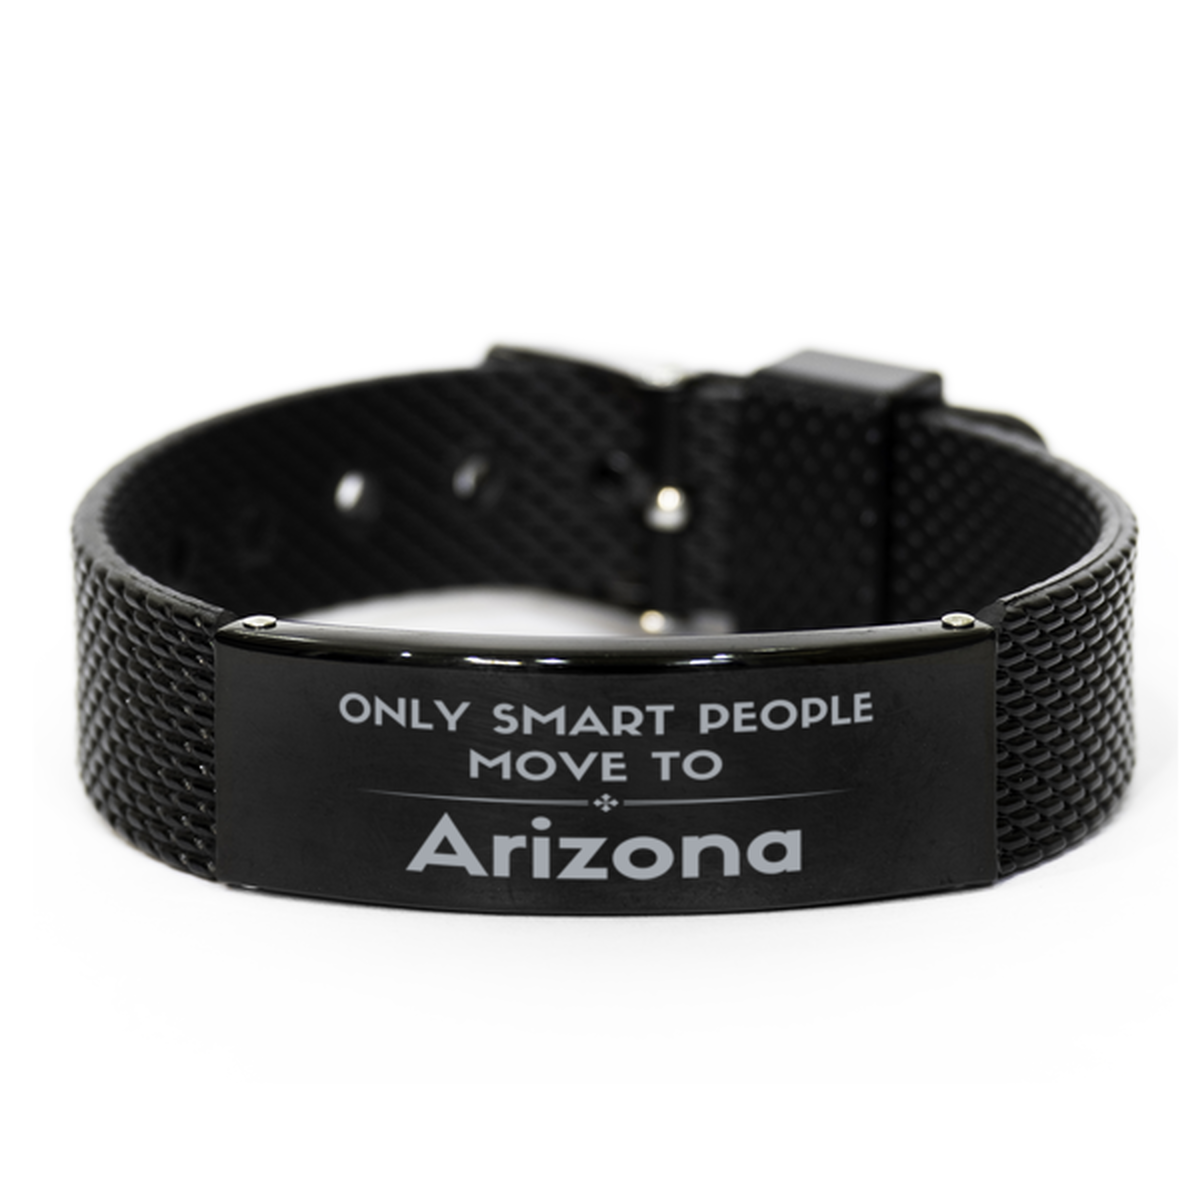 Only smart people move to Arizona Black Shark Mesh Bracelet, Gag Gifts For Arizona, Move to Arizona Gifts for Friends Coworker Funny Saying Quote